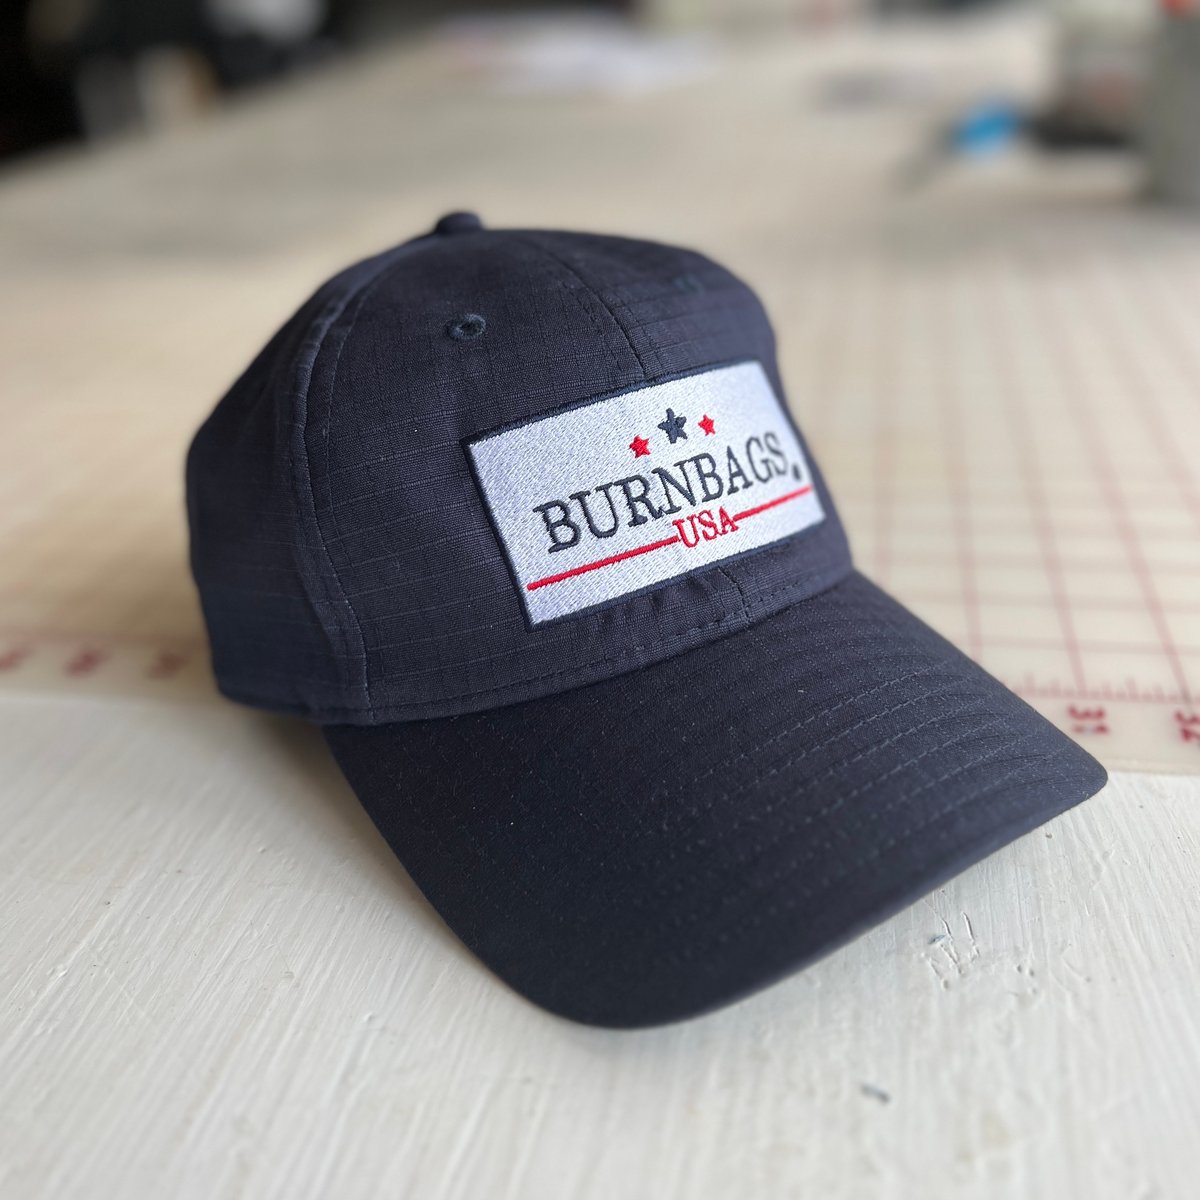 ** NEW Solid navy hat | Burn Bags USA